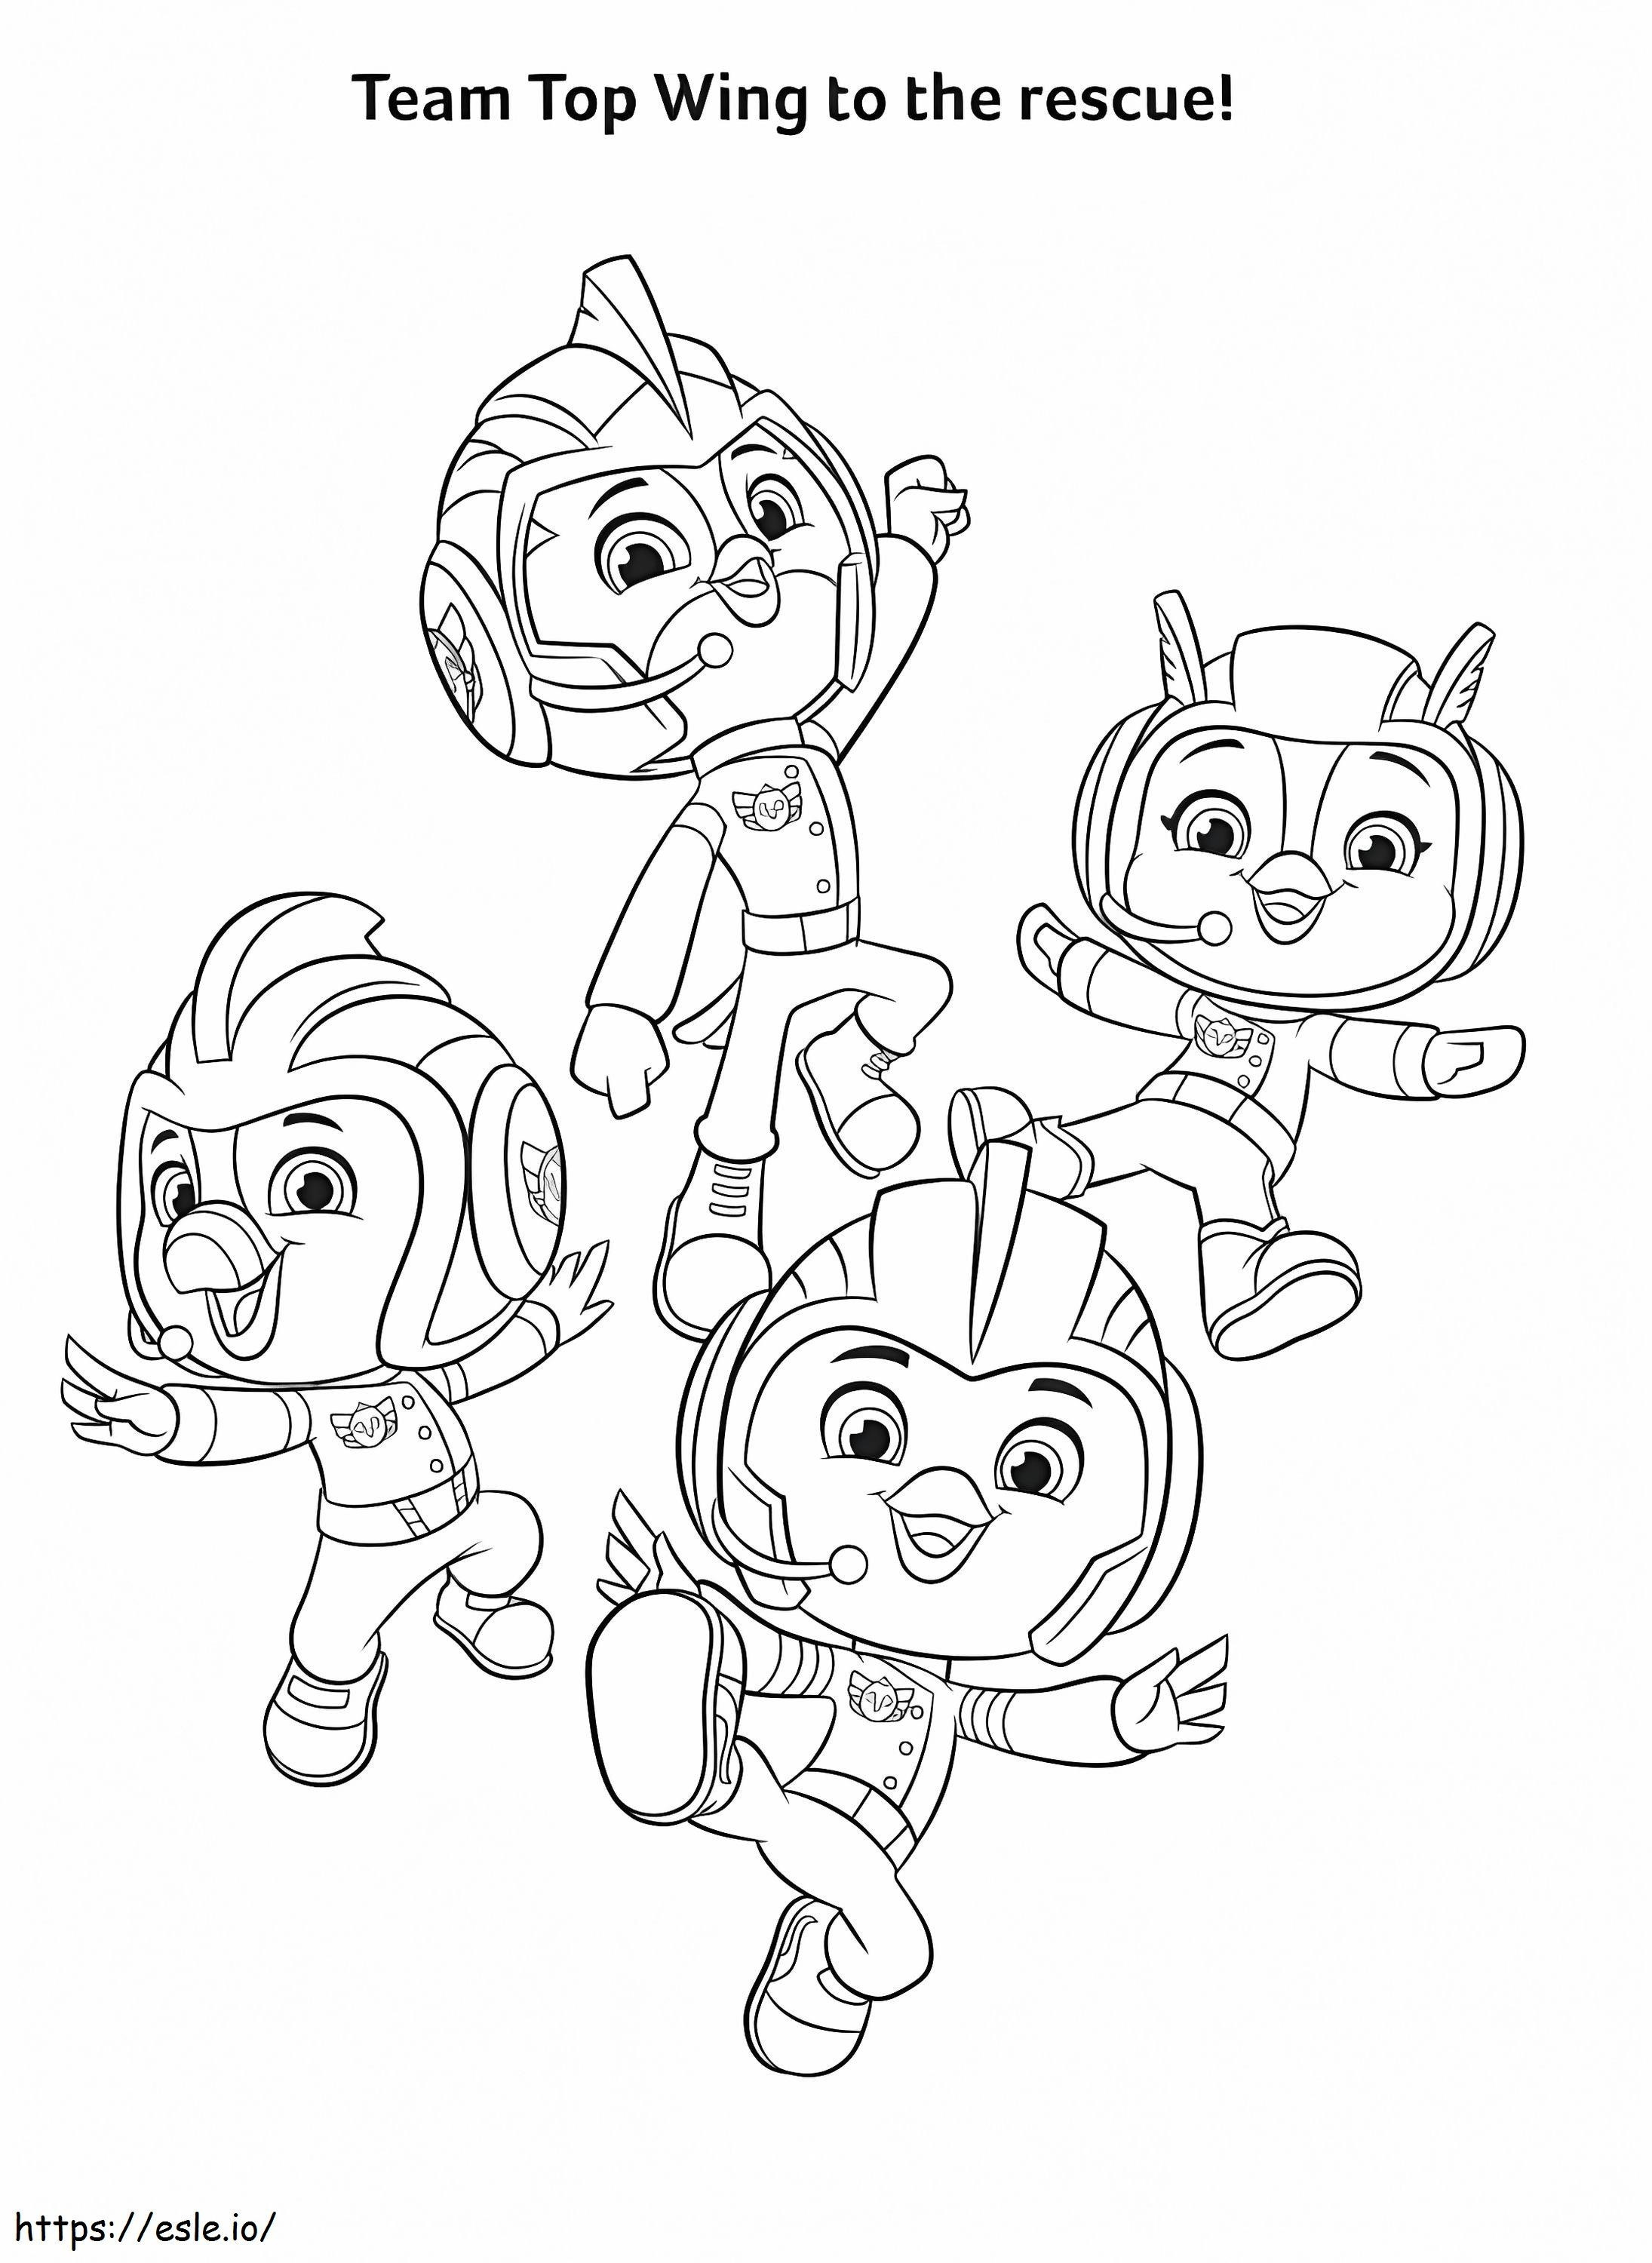 Team Top Wing coloring page